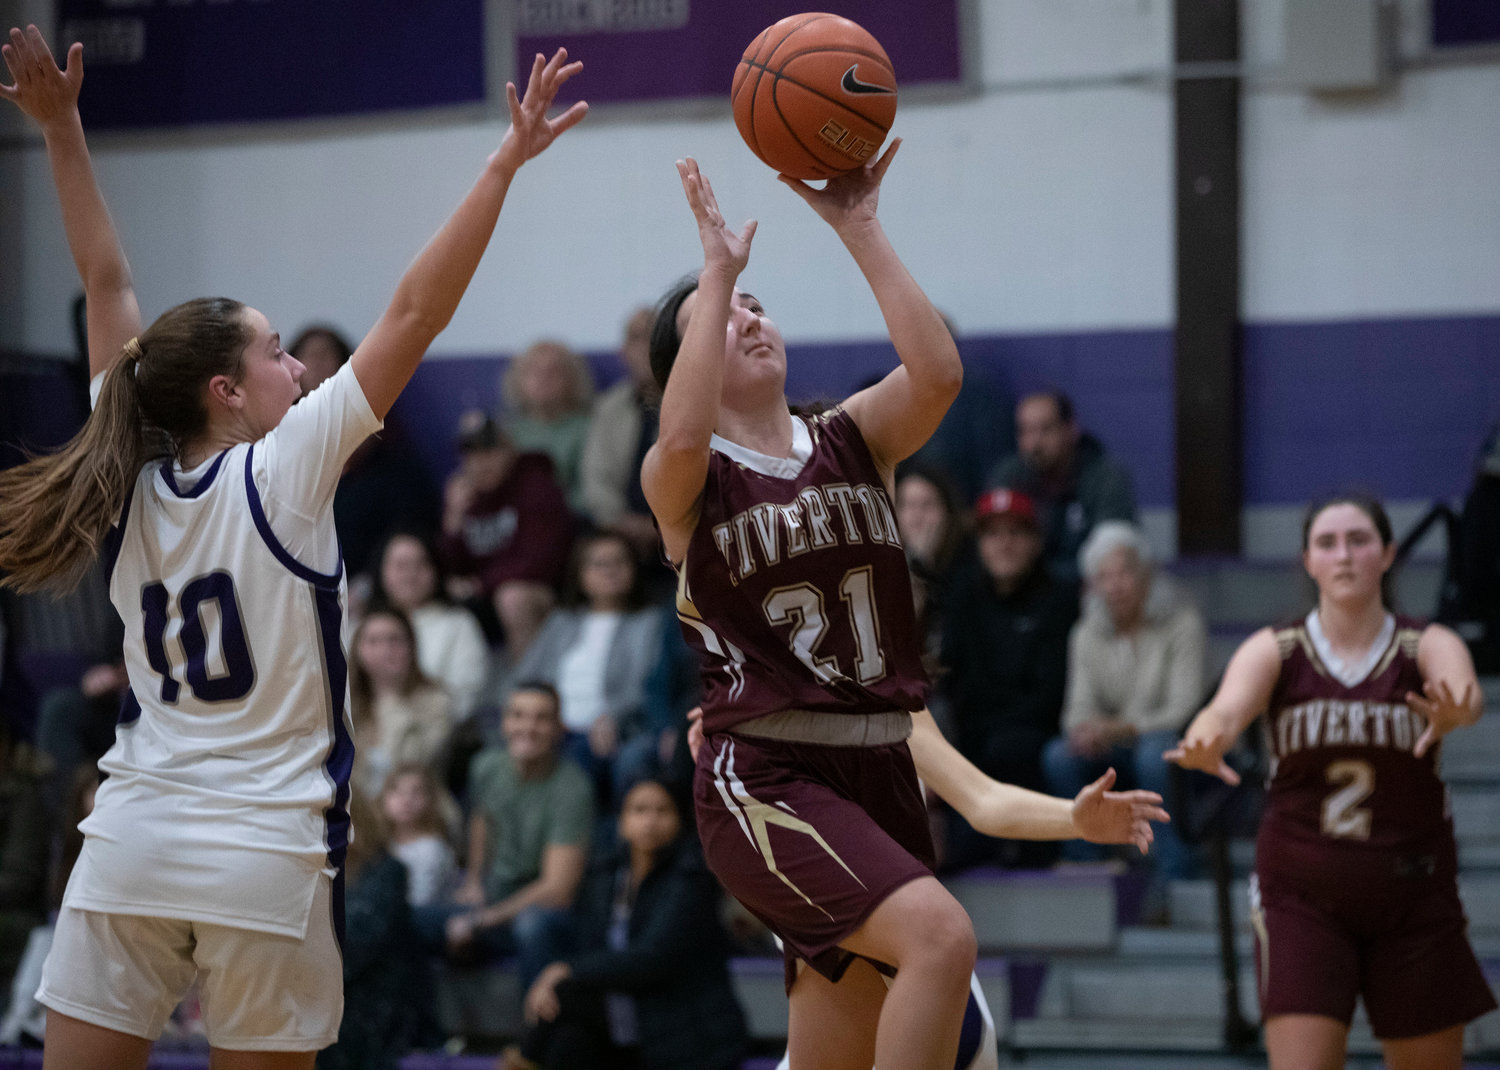 Sam Bettencourt drives in for a layup. The senior point guard scored 26 points as the Tigers beat Mt. Hope 42-29 in a Division II preliminary playoff game on Thursday.